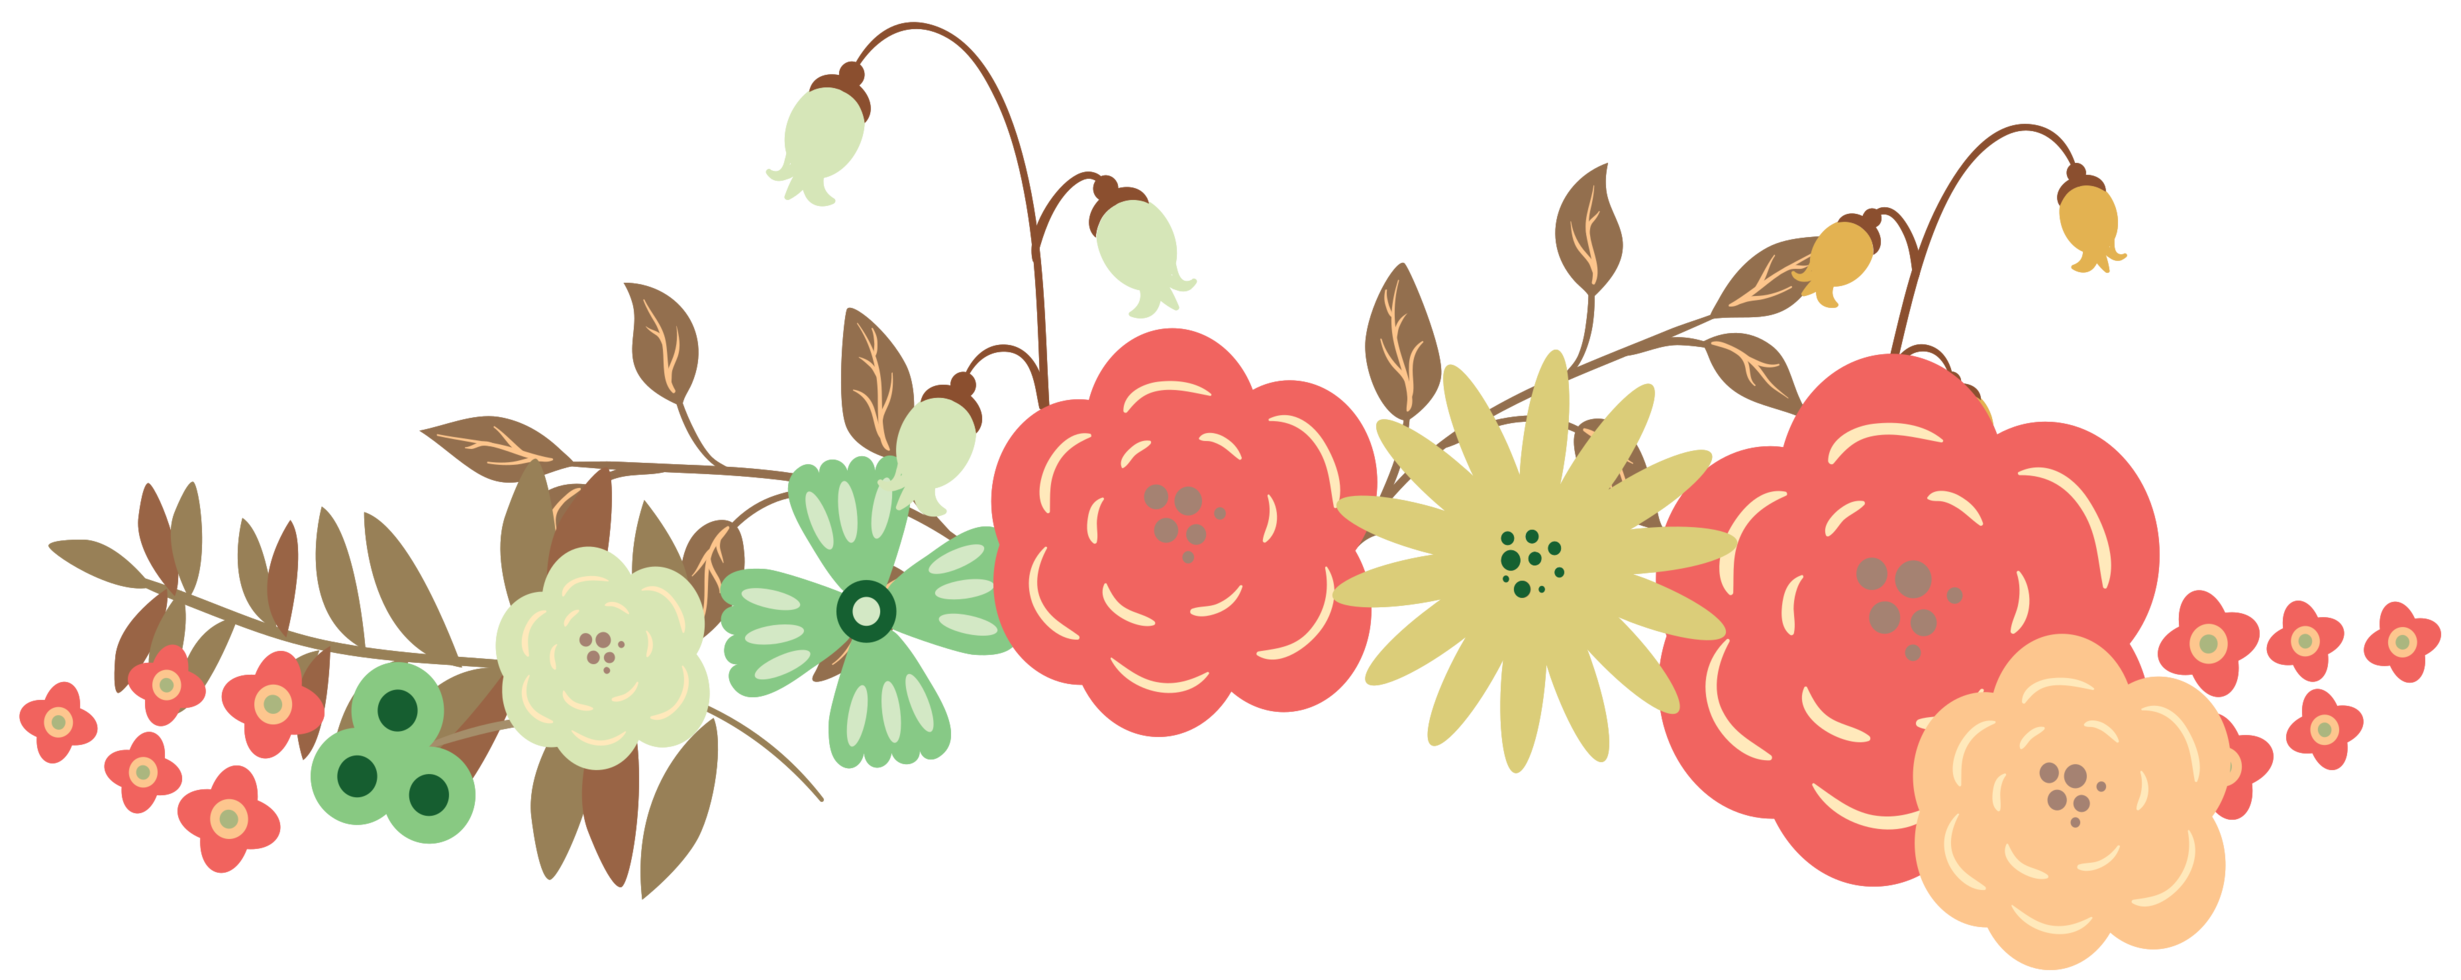 Flower PNG HD Images